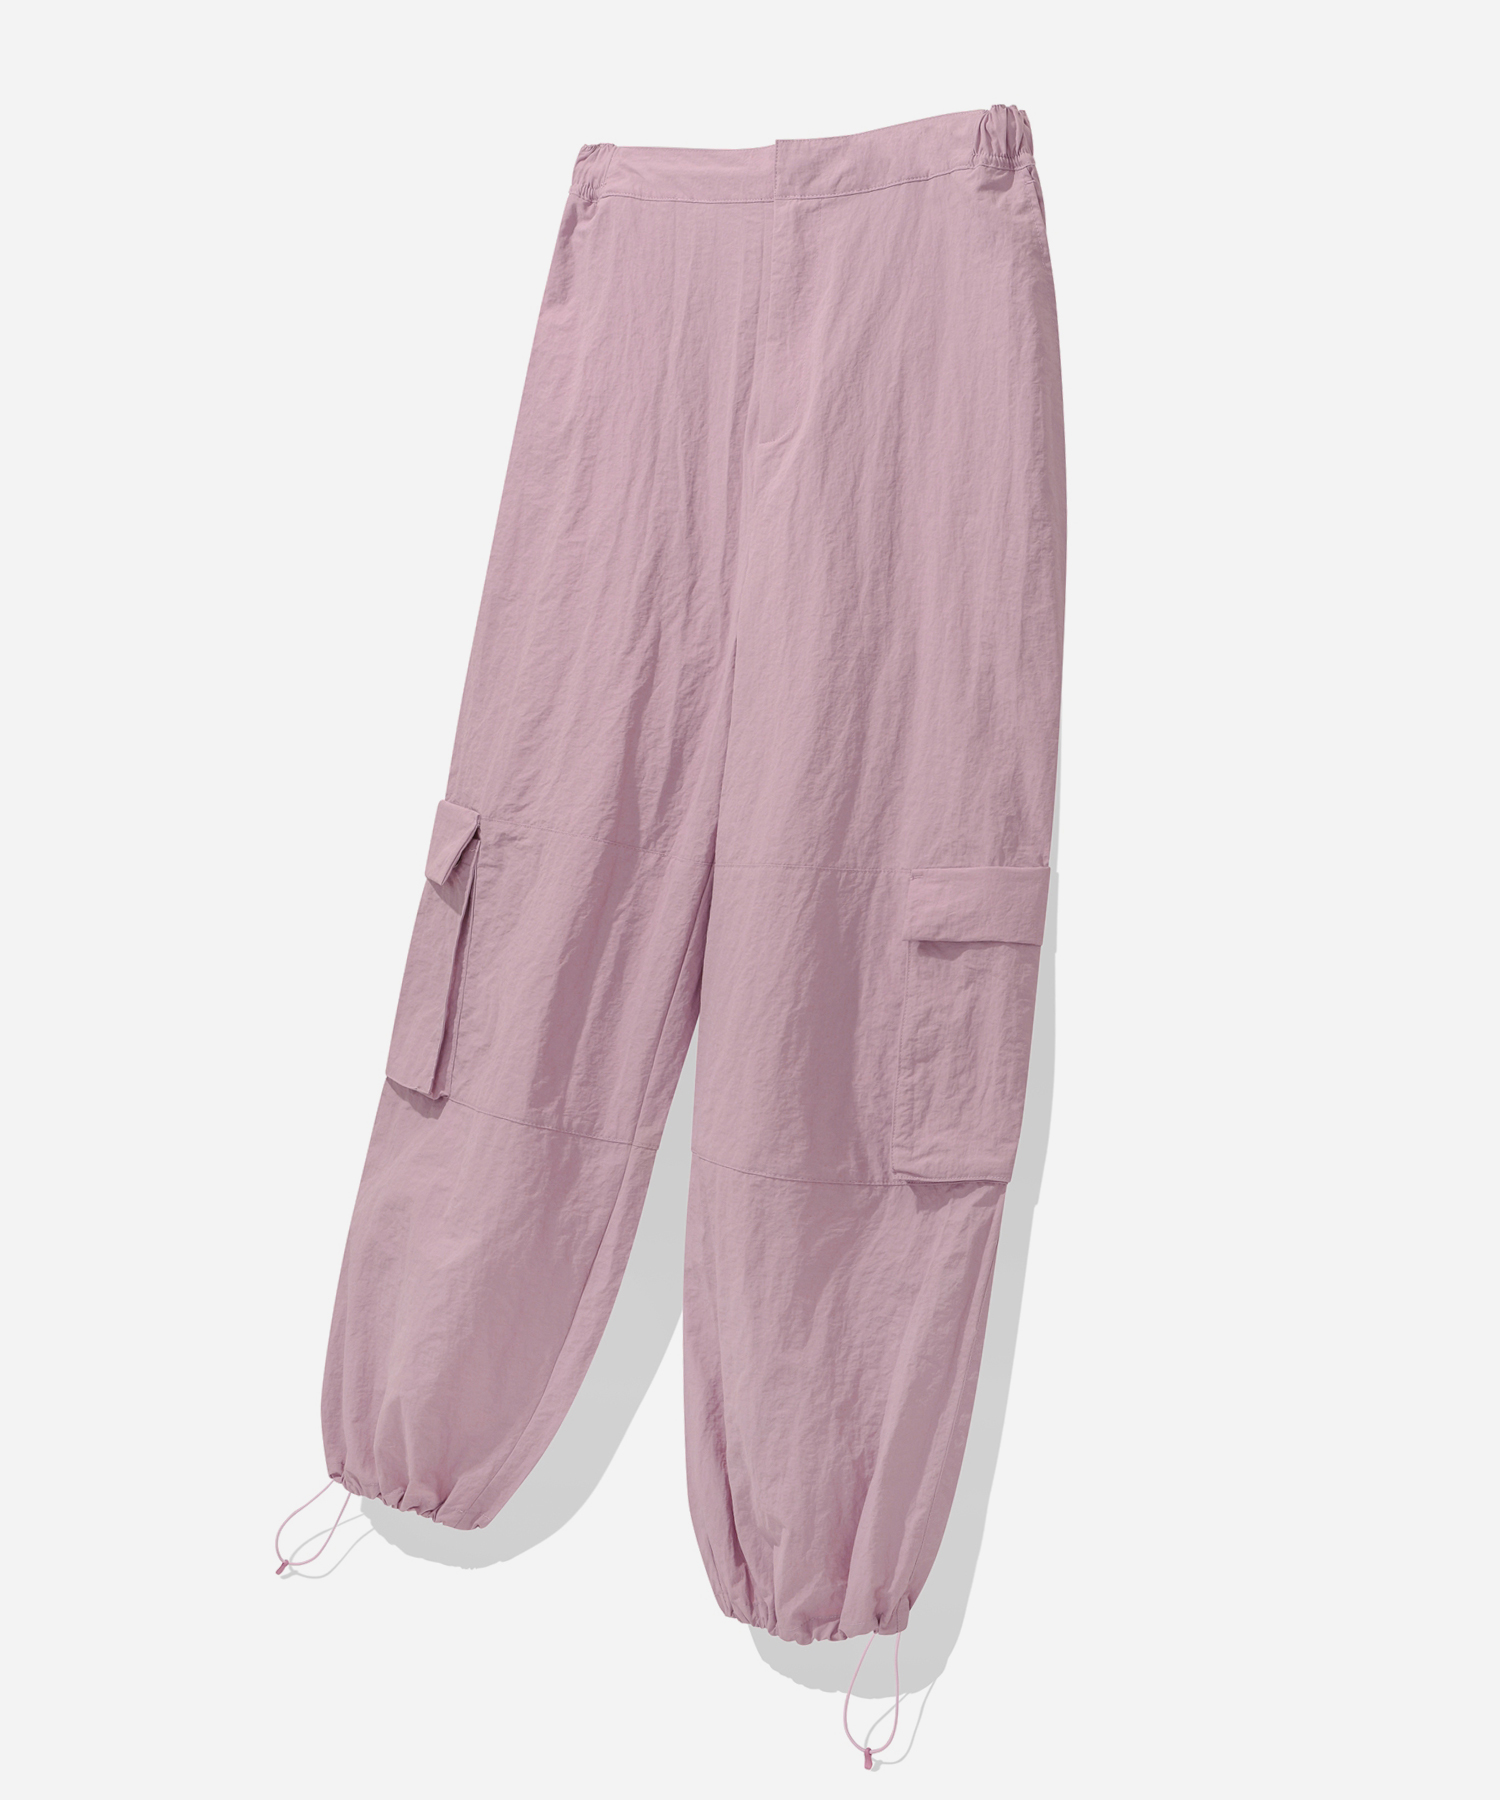 NYLON SPORTY CARGO PANTS INDIE PINK